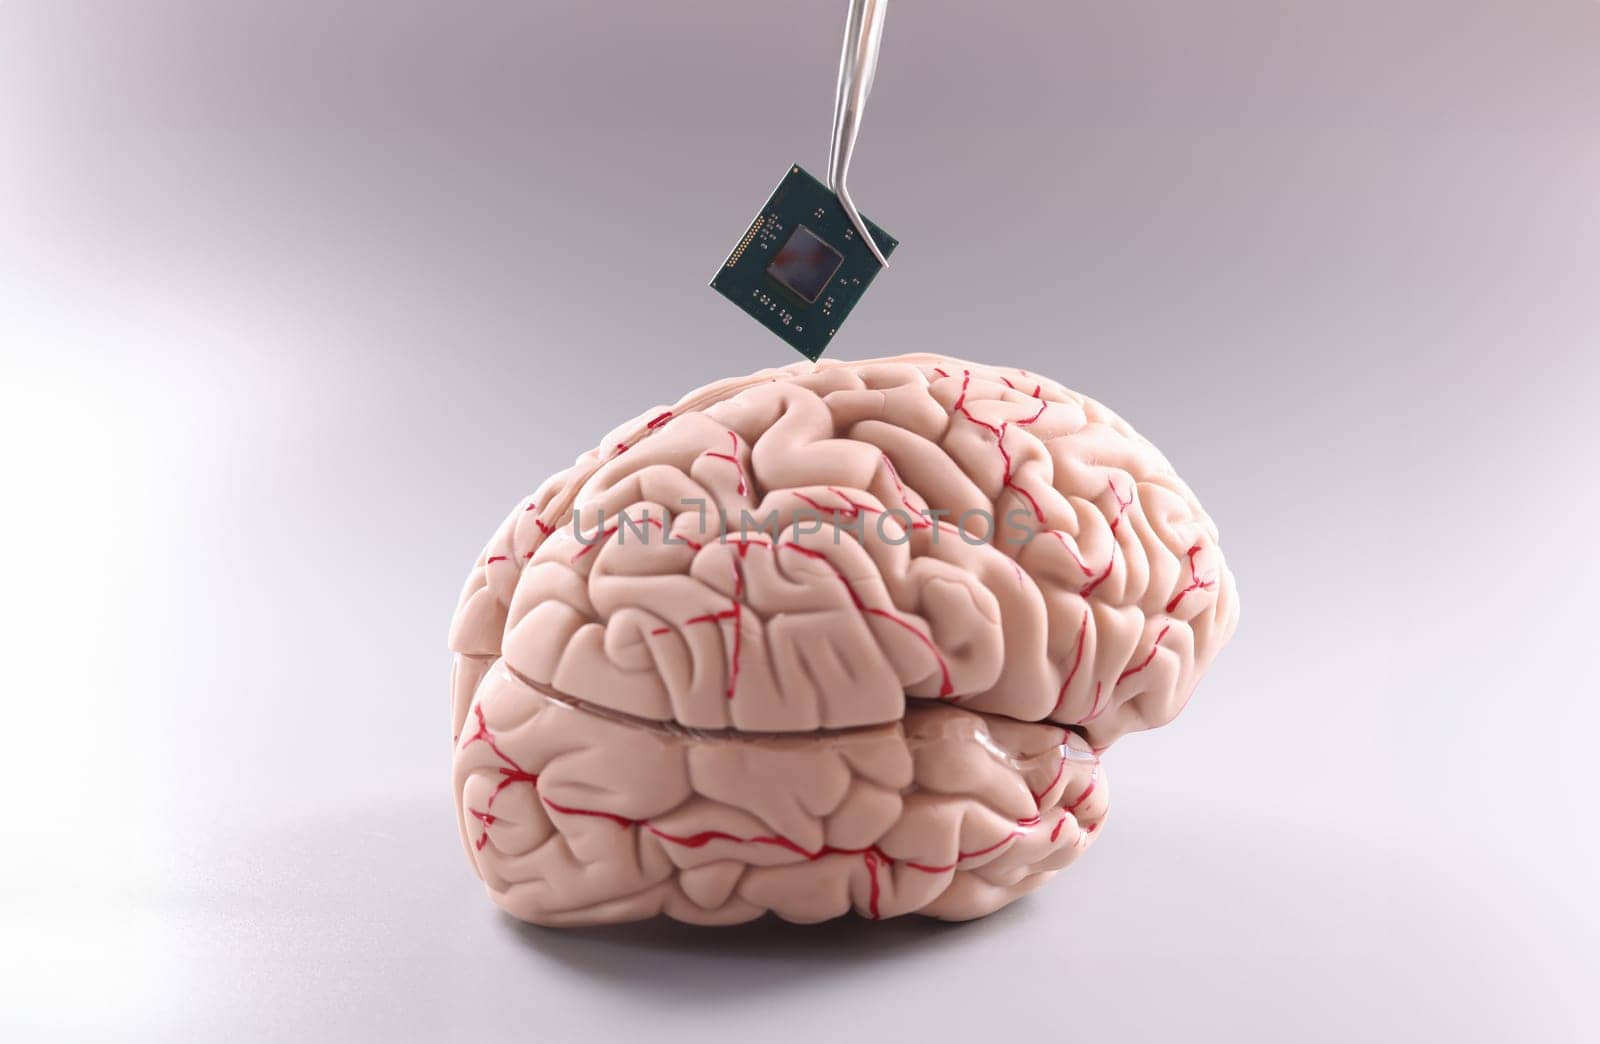 Anatomy of human brain with computer chip. Artificial intelligence chips concept